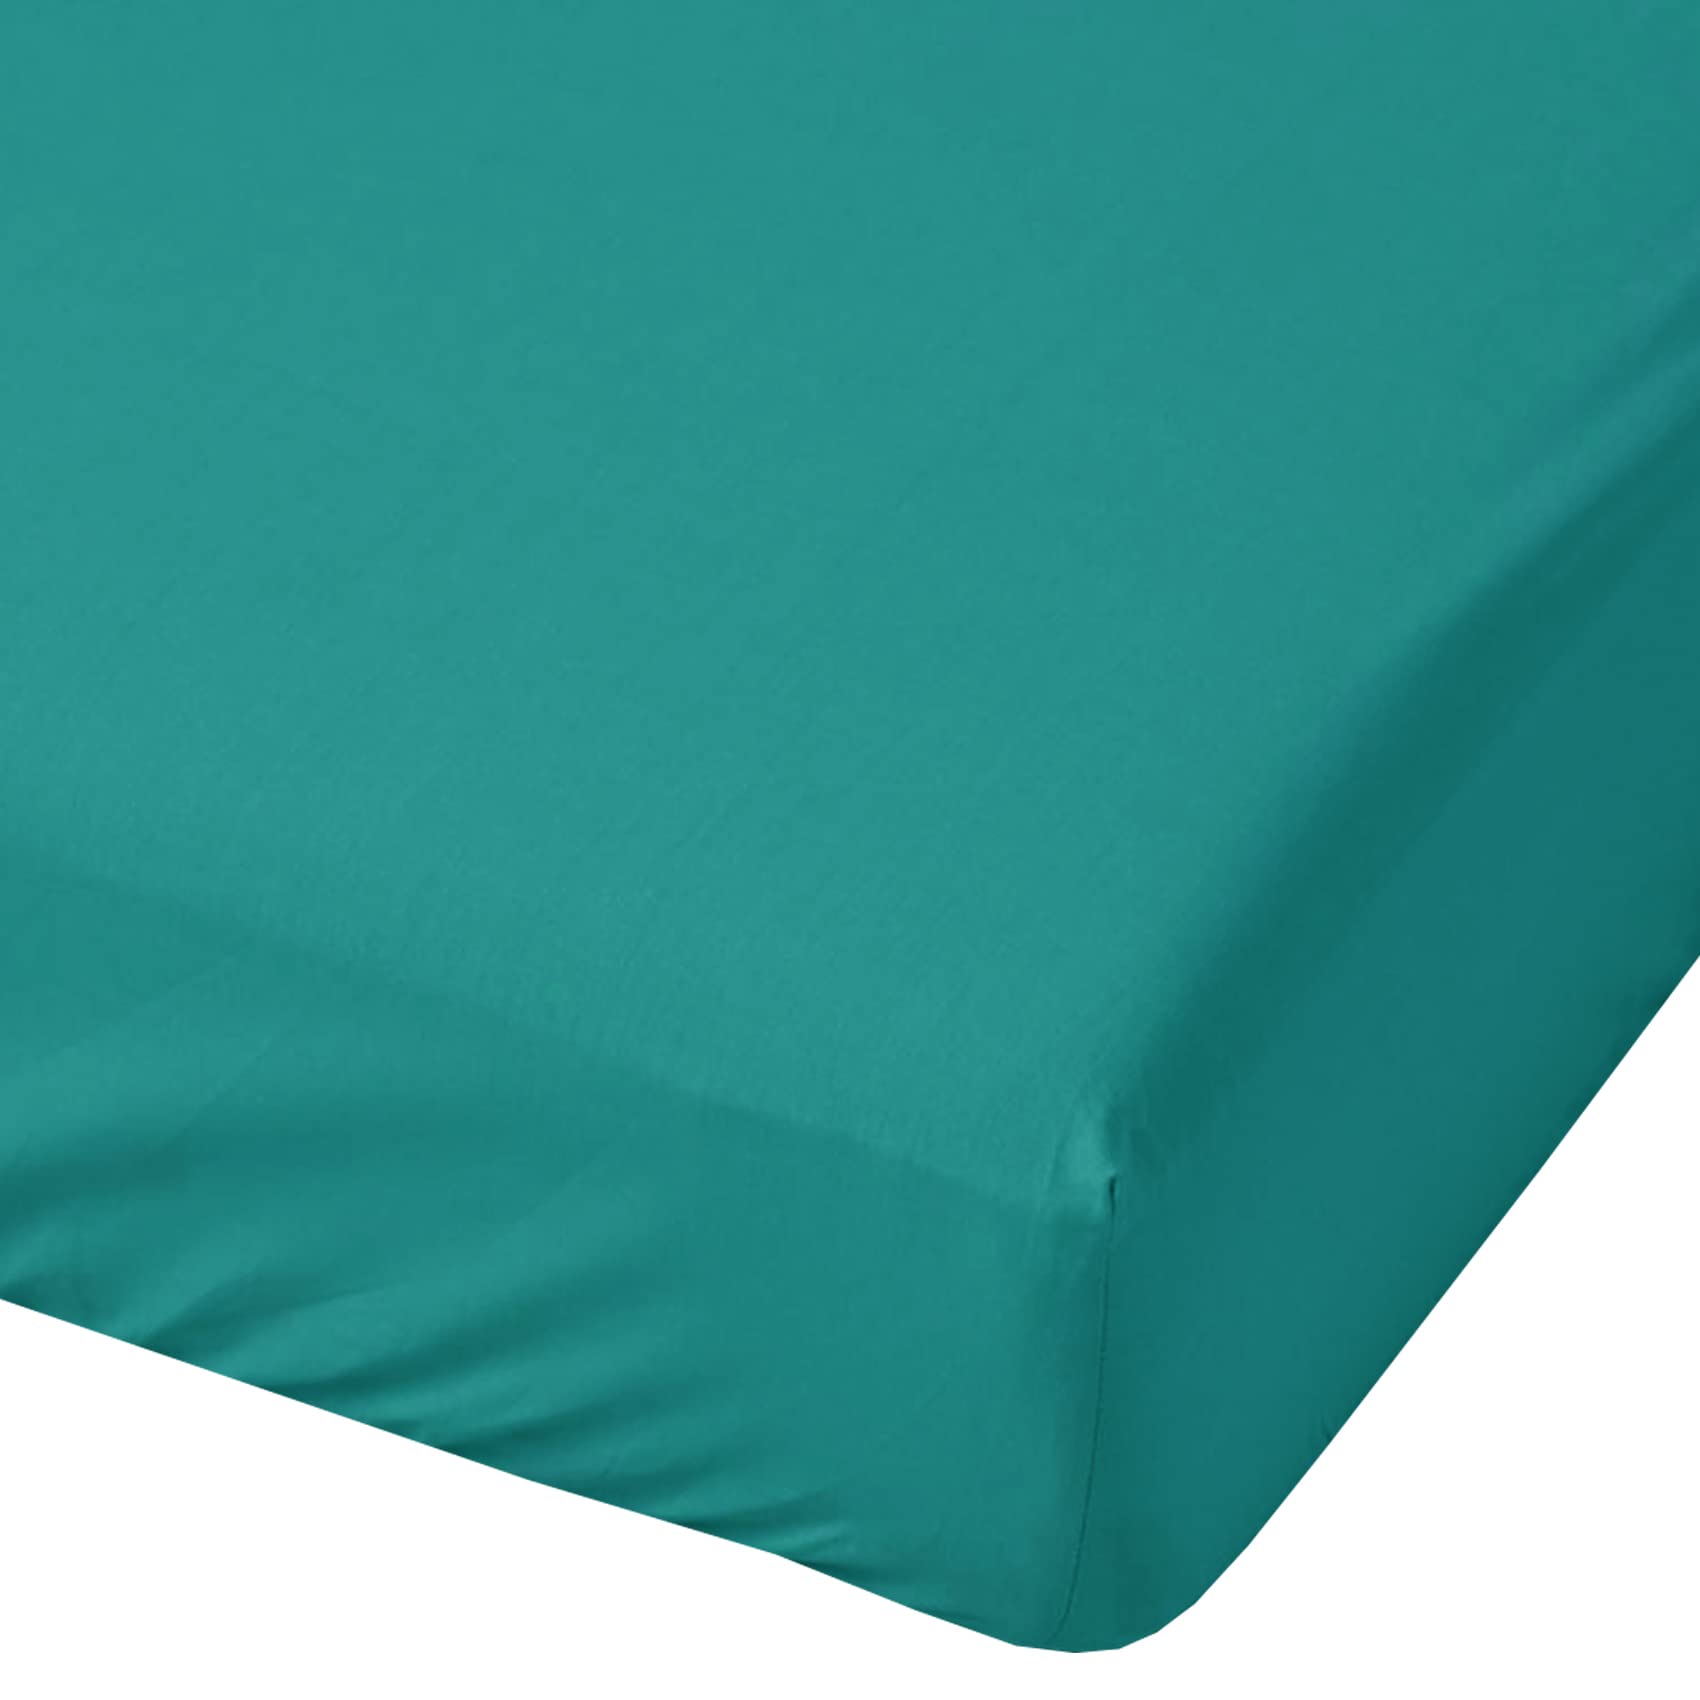 Homely Ideas Easycare Fitted Sheet 40CM/16 Inches Extra Deep with Elasticated Corners, Breathable Polycotton Bed Sheets (Teal, 4ft / Small Double)